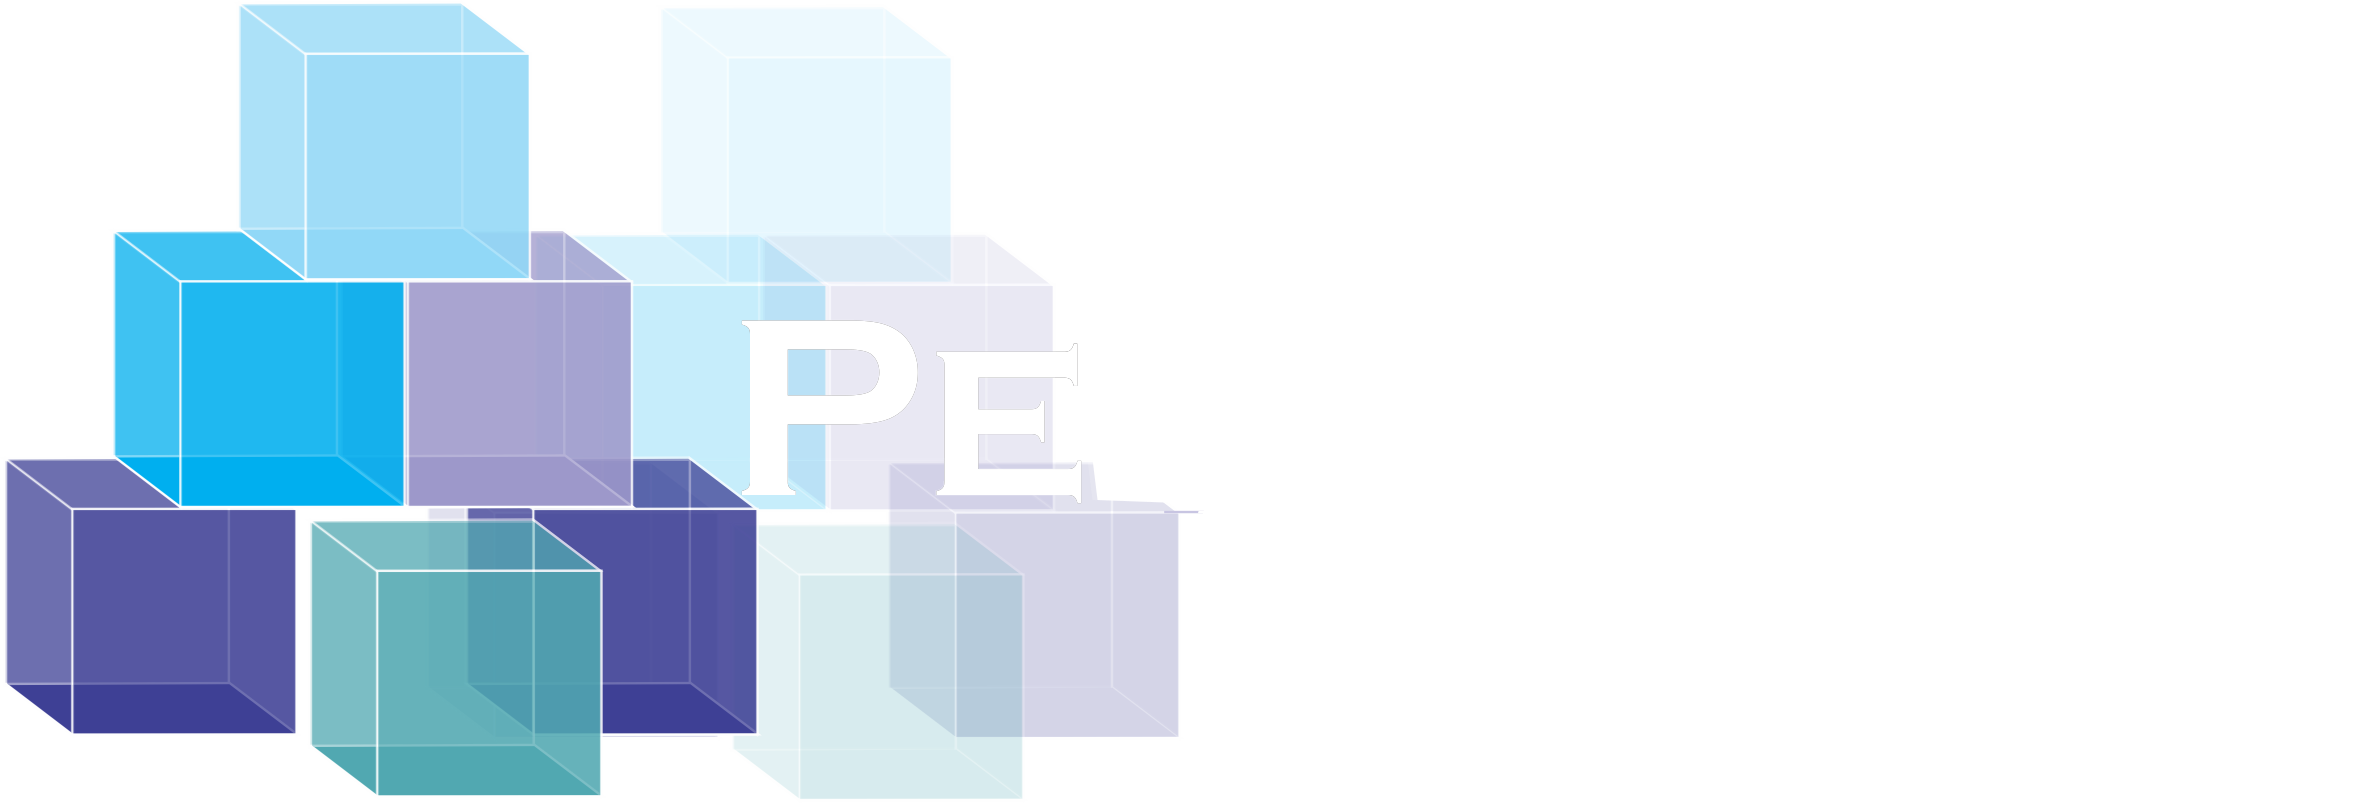  Personale Fiscal 